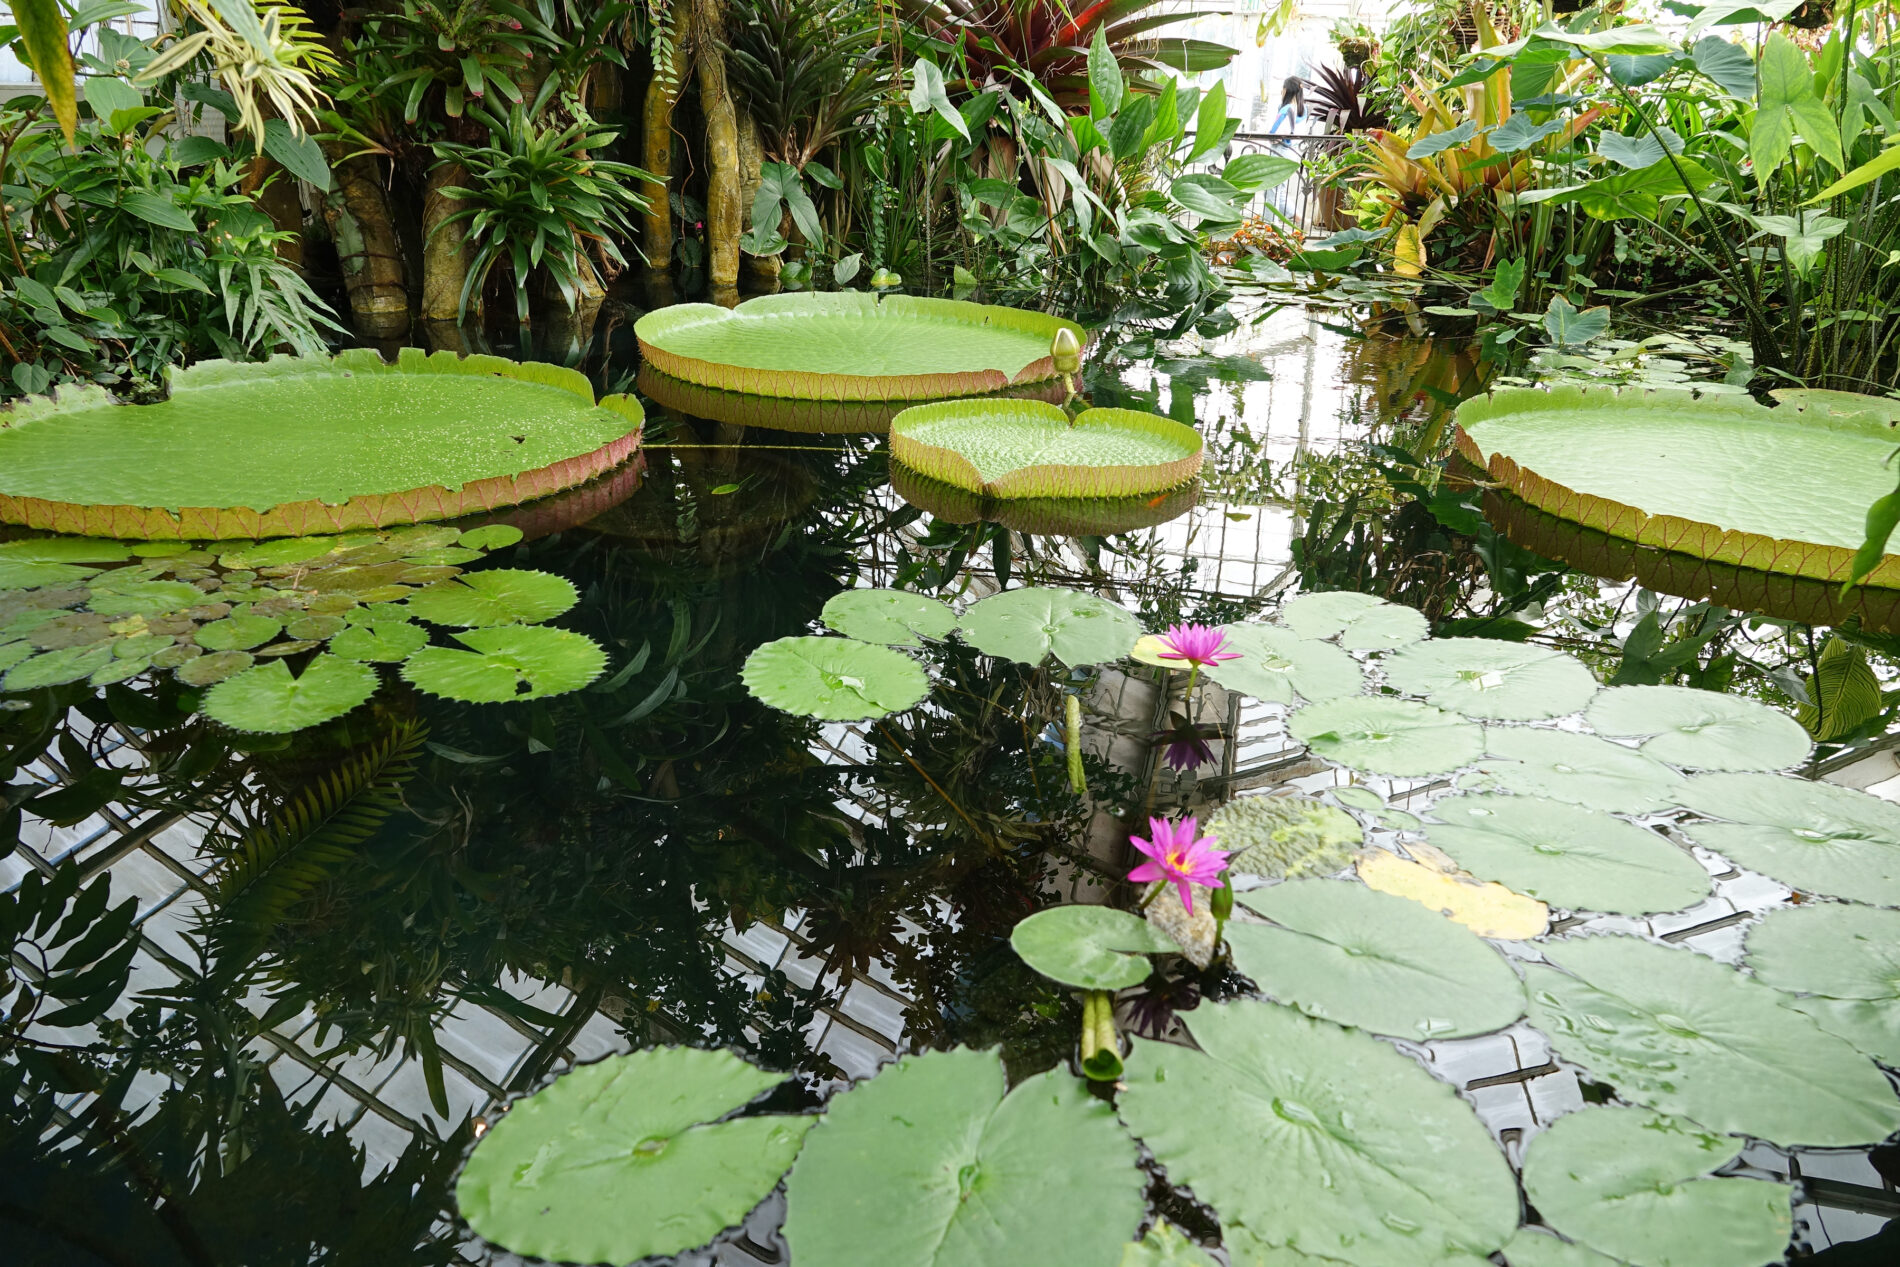 Giant Lily Pads and water lilies at the Conservatory of Flowers in San Francisco Golden Gate Park.